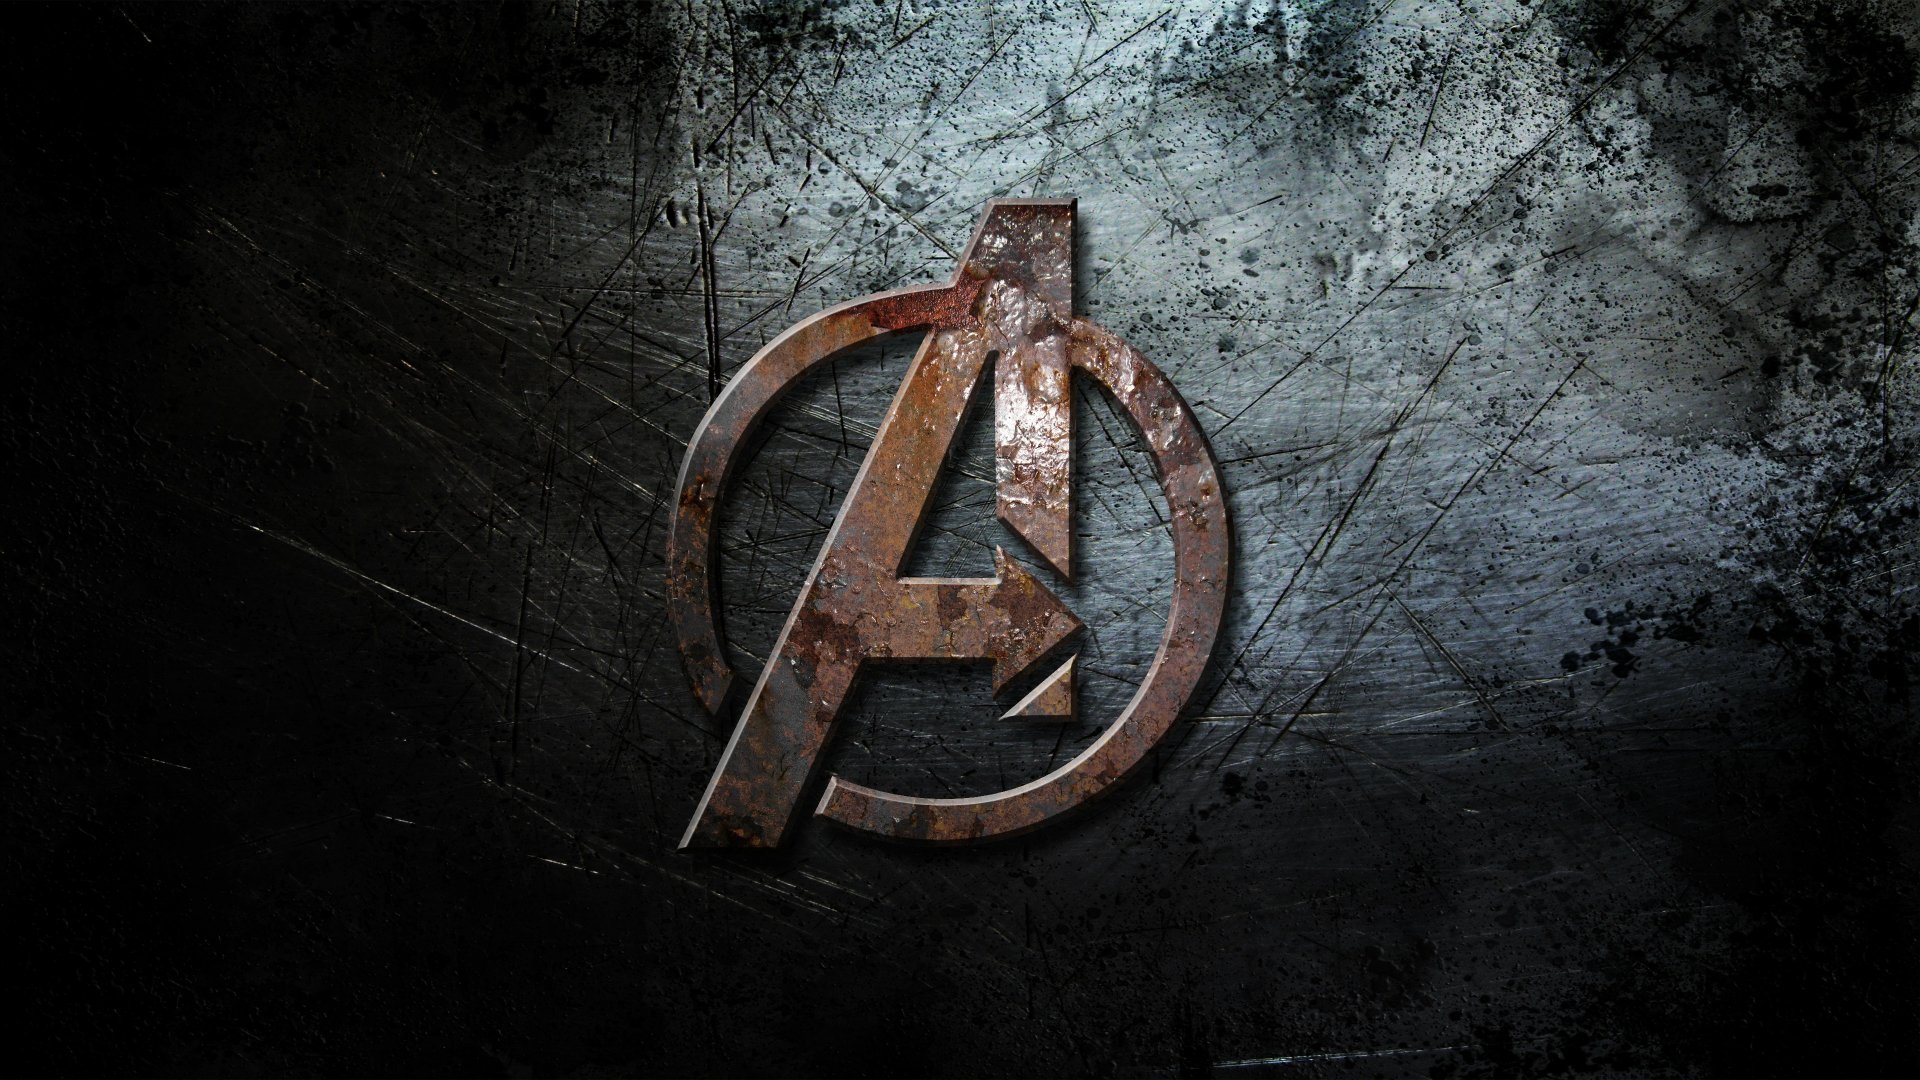 The Avengers download the new for windows